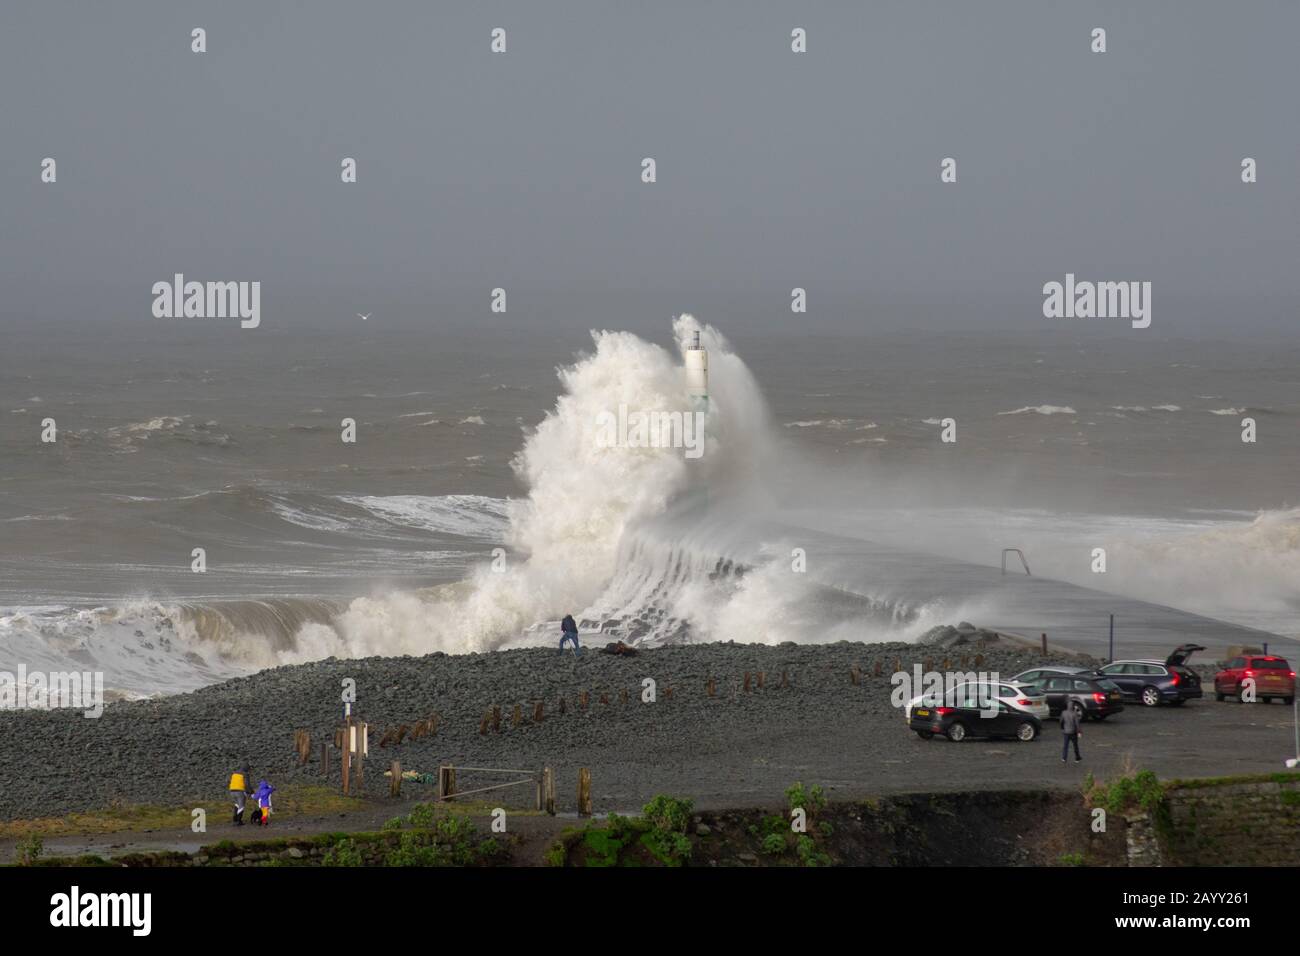 Stormy weather creates big waves that smash into Aberystwyth, Wales while onlookers are dwarfed by the size of the waves. Stock Photo